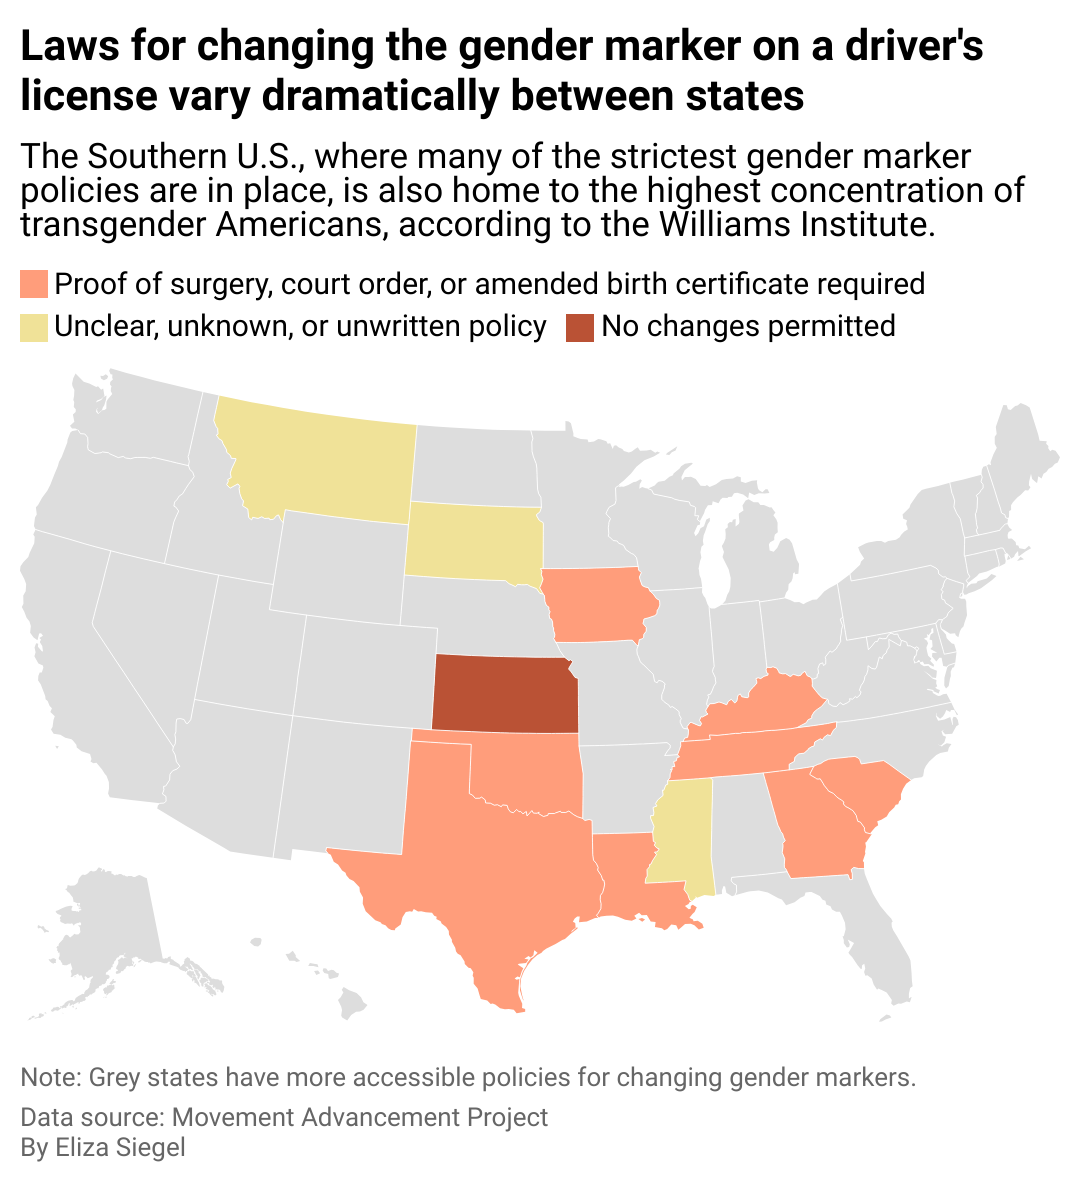 This map of the U.S. shows the varying laws for changing the gender marker on a driver's license by state. The Southern U.S., where many of the strictest gender marker policies are in place, is also home to the highest concentration of transgender Americans, according to The Williams Institute. 